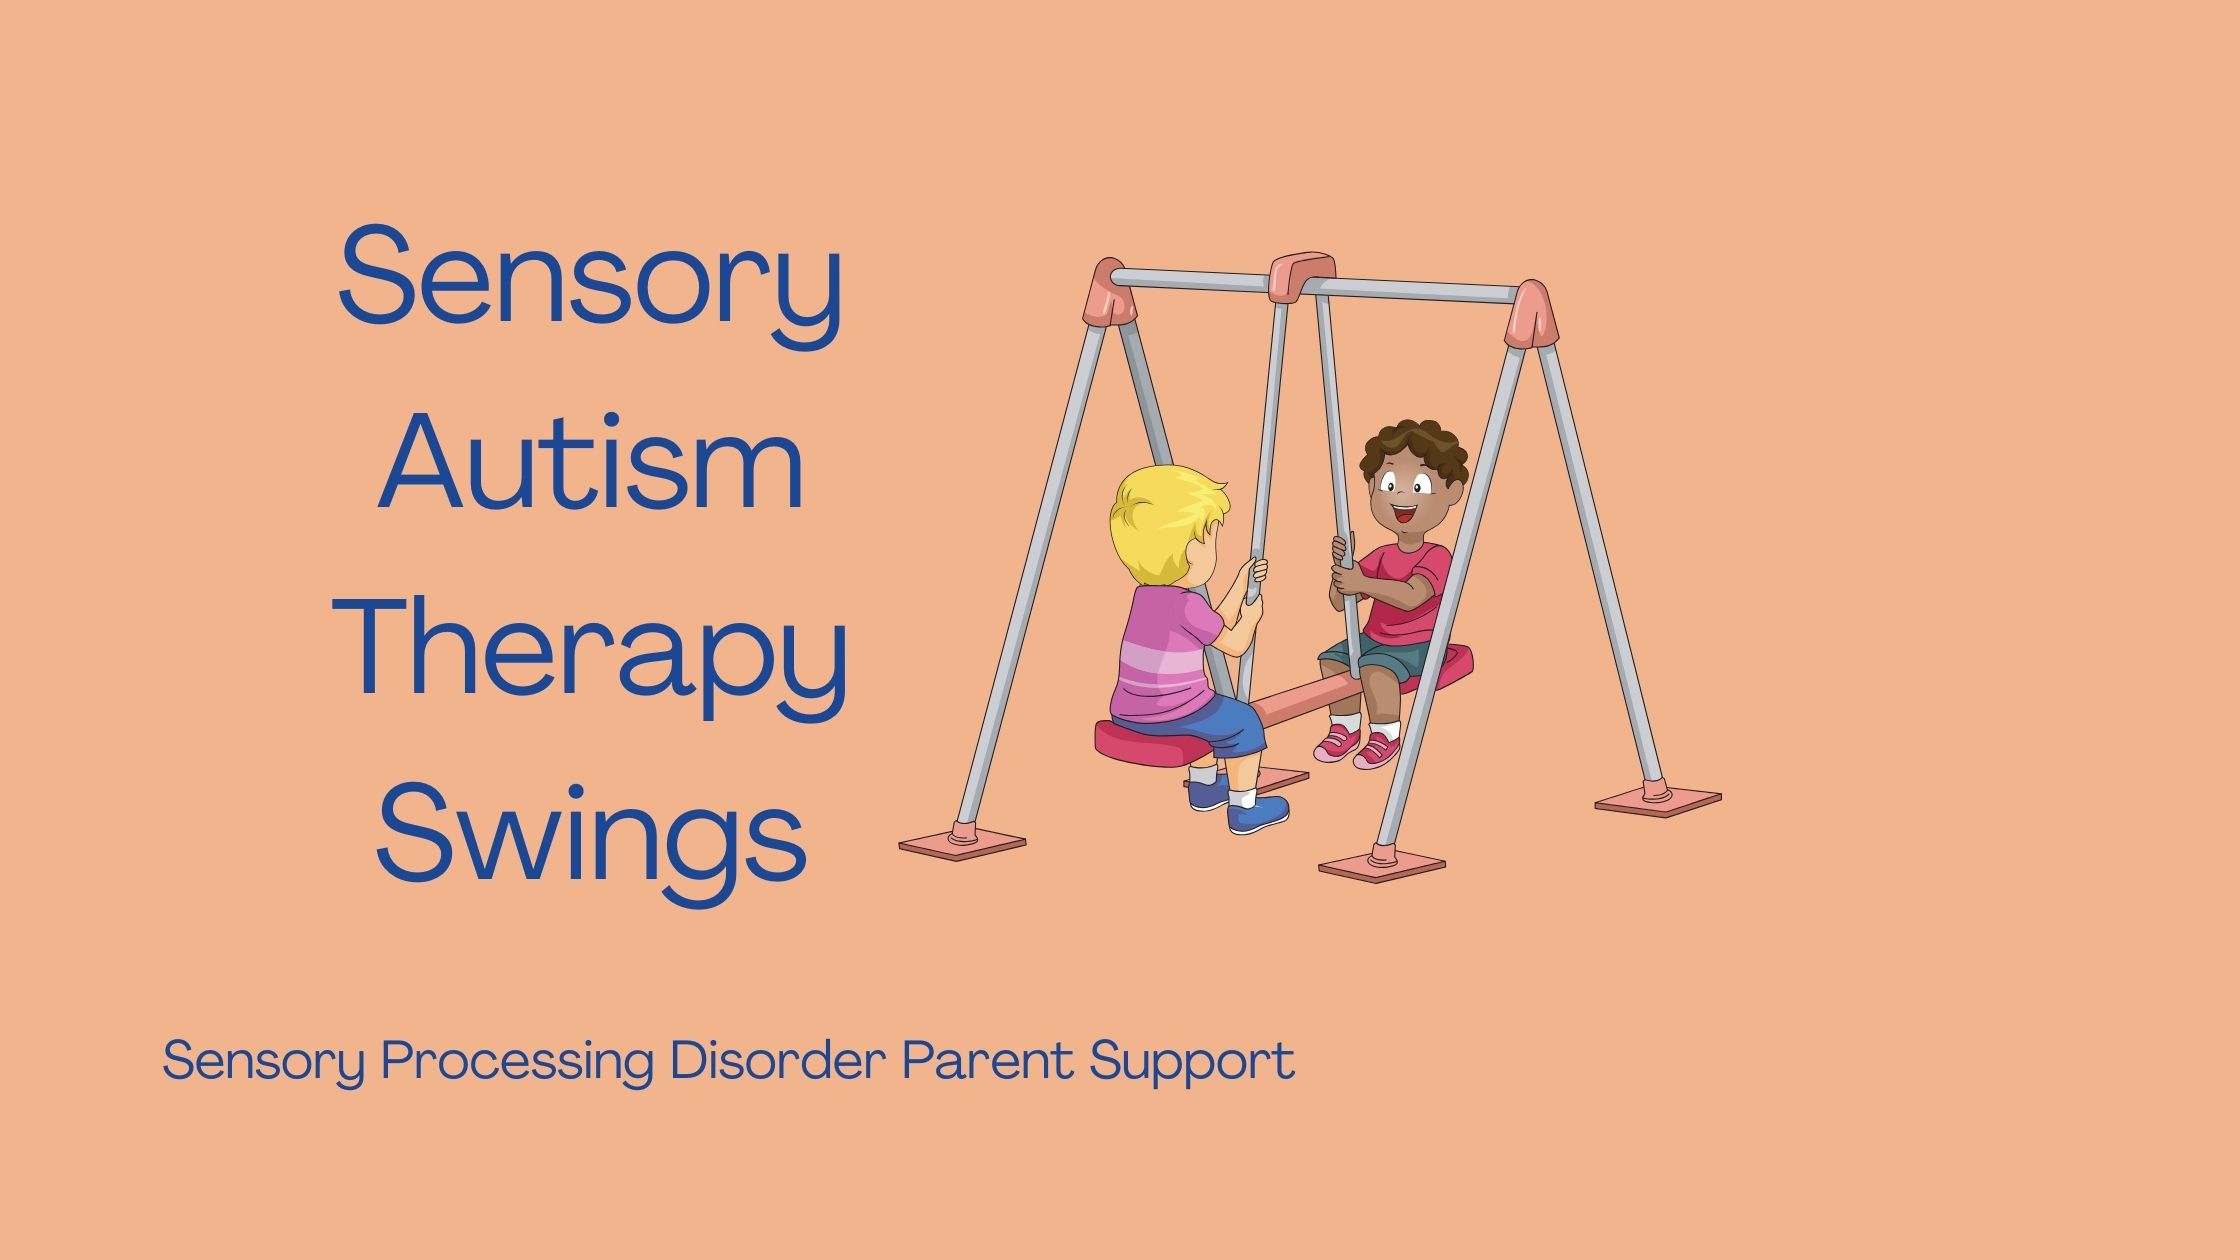 children who have sensory processing disorder swinging on sensory swing Sensory Autism Therapy Swings